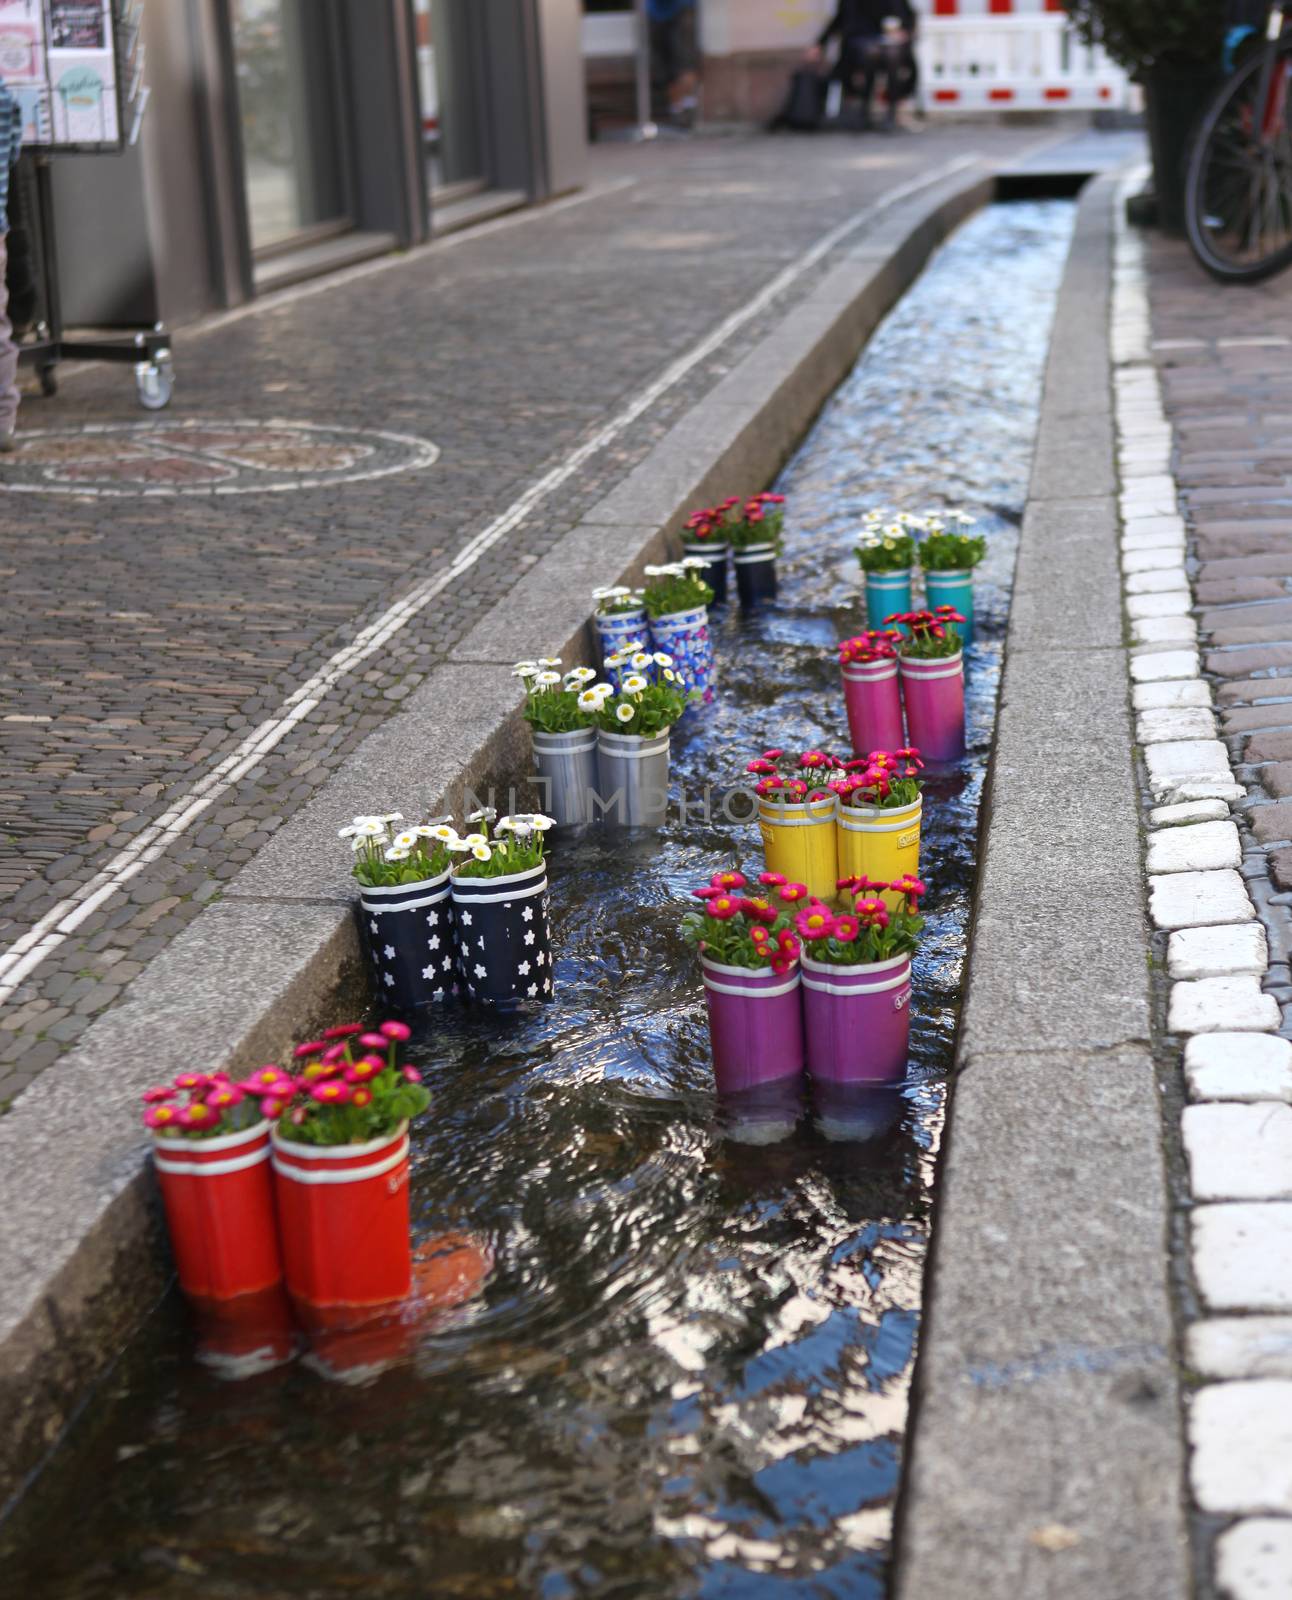 Rubber boots in the water with flowers in the city of Freiburg. Tourist attraction. by sermax55